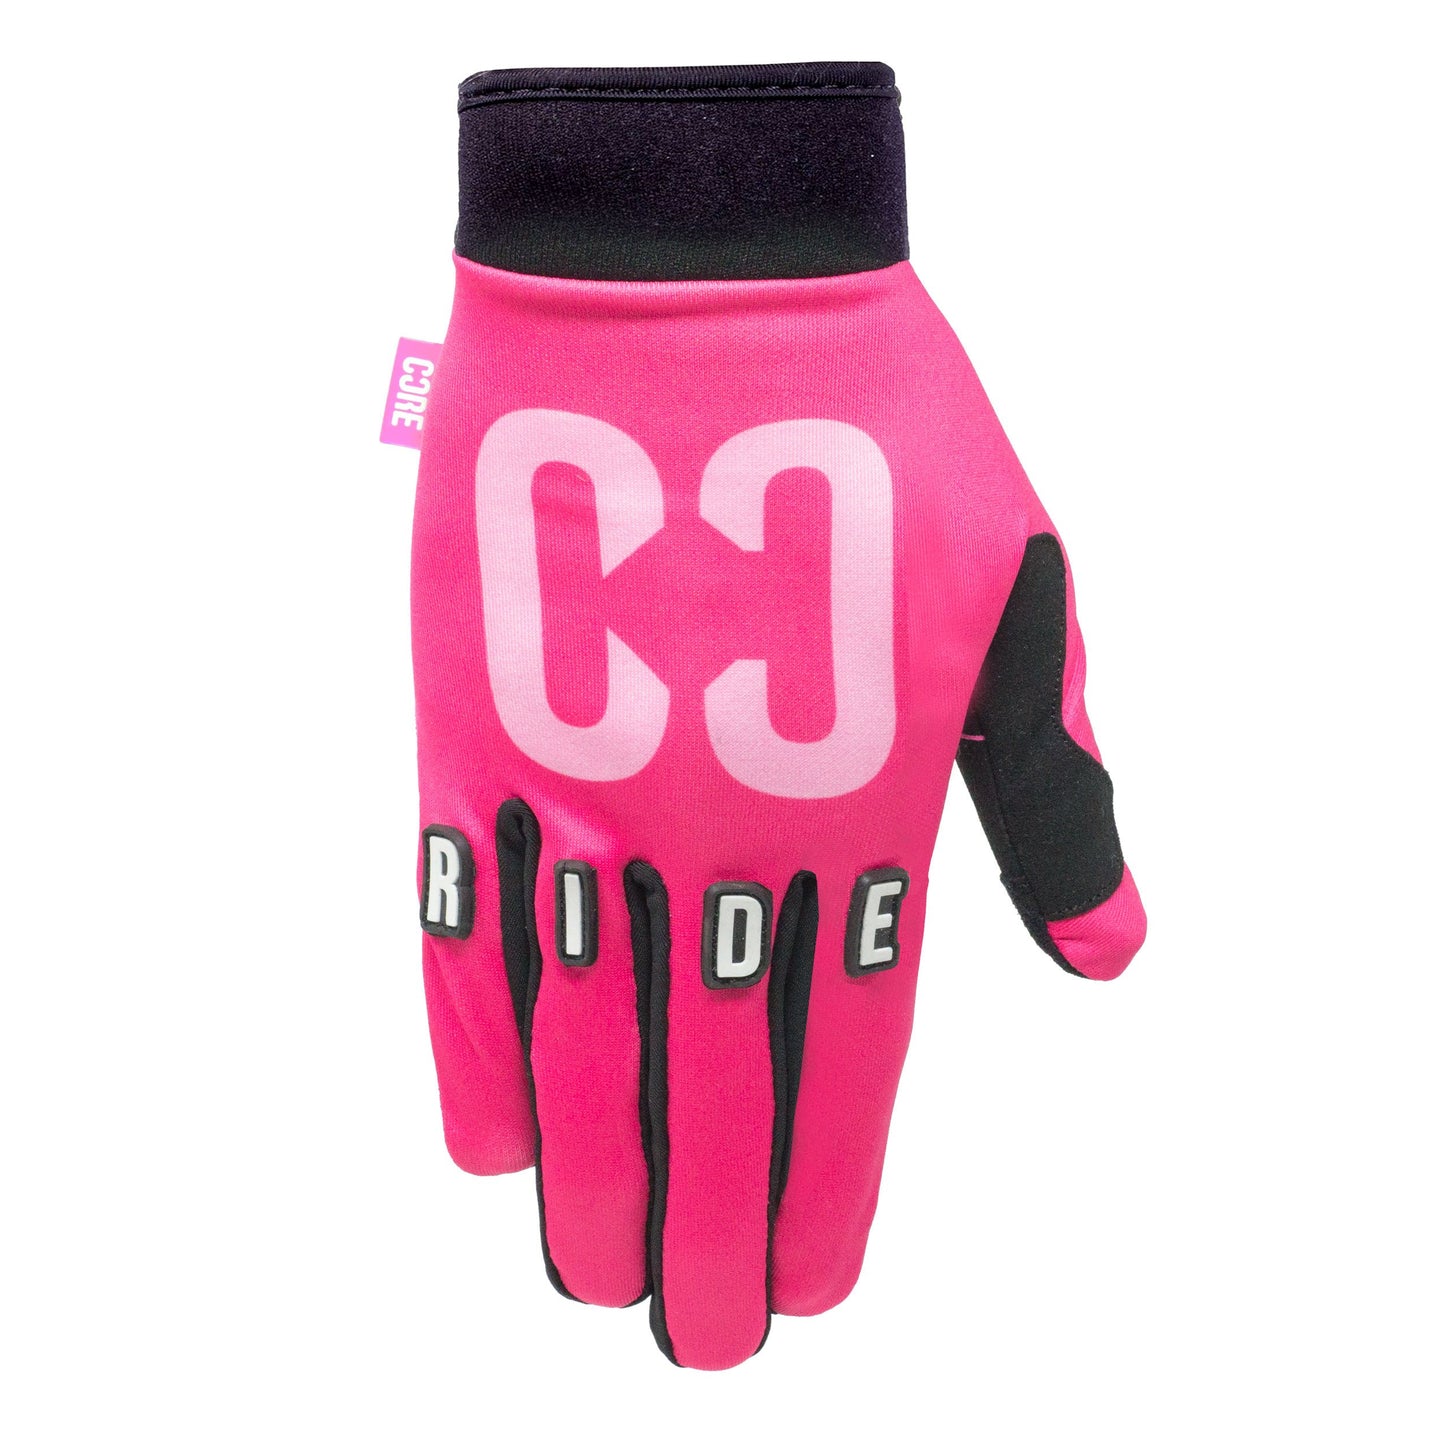 CORE Protection Gloves - Pink - Prime Delux Store